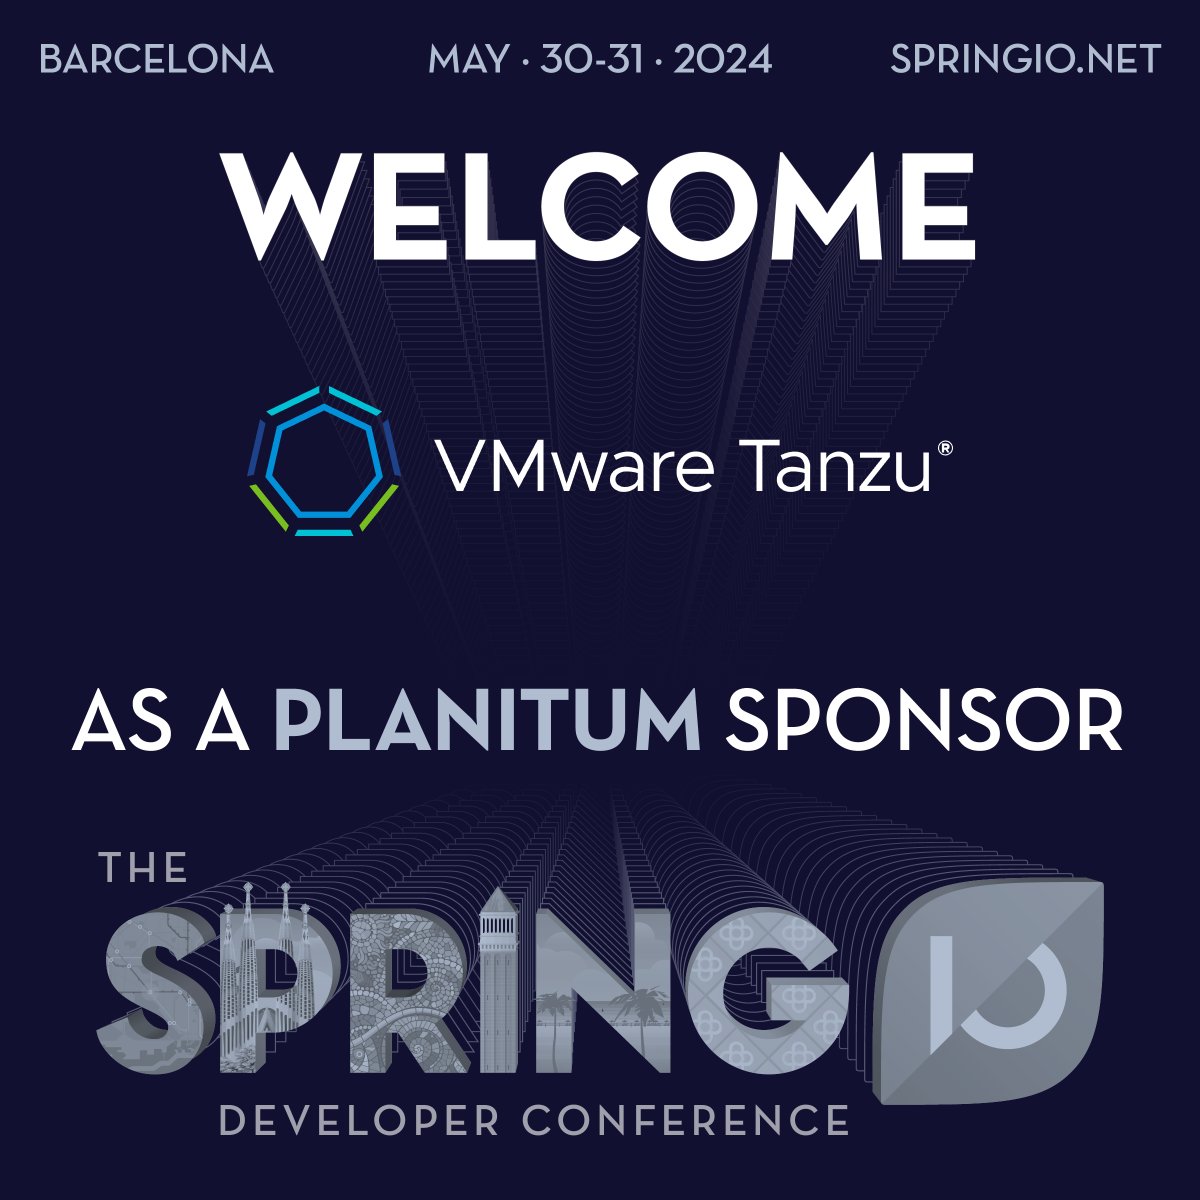 🎉 We are honored to welcome @VMwareTanzu as a Platinum Sponsor for Spring I/O 2024! 🥇Thank you for your incredible support. #springio24 tanzu.vmware.com